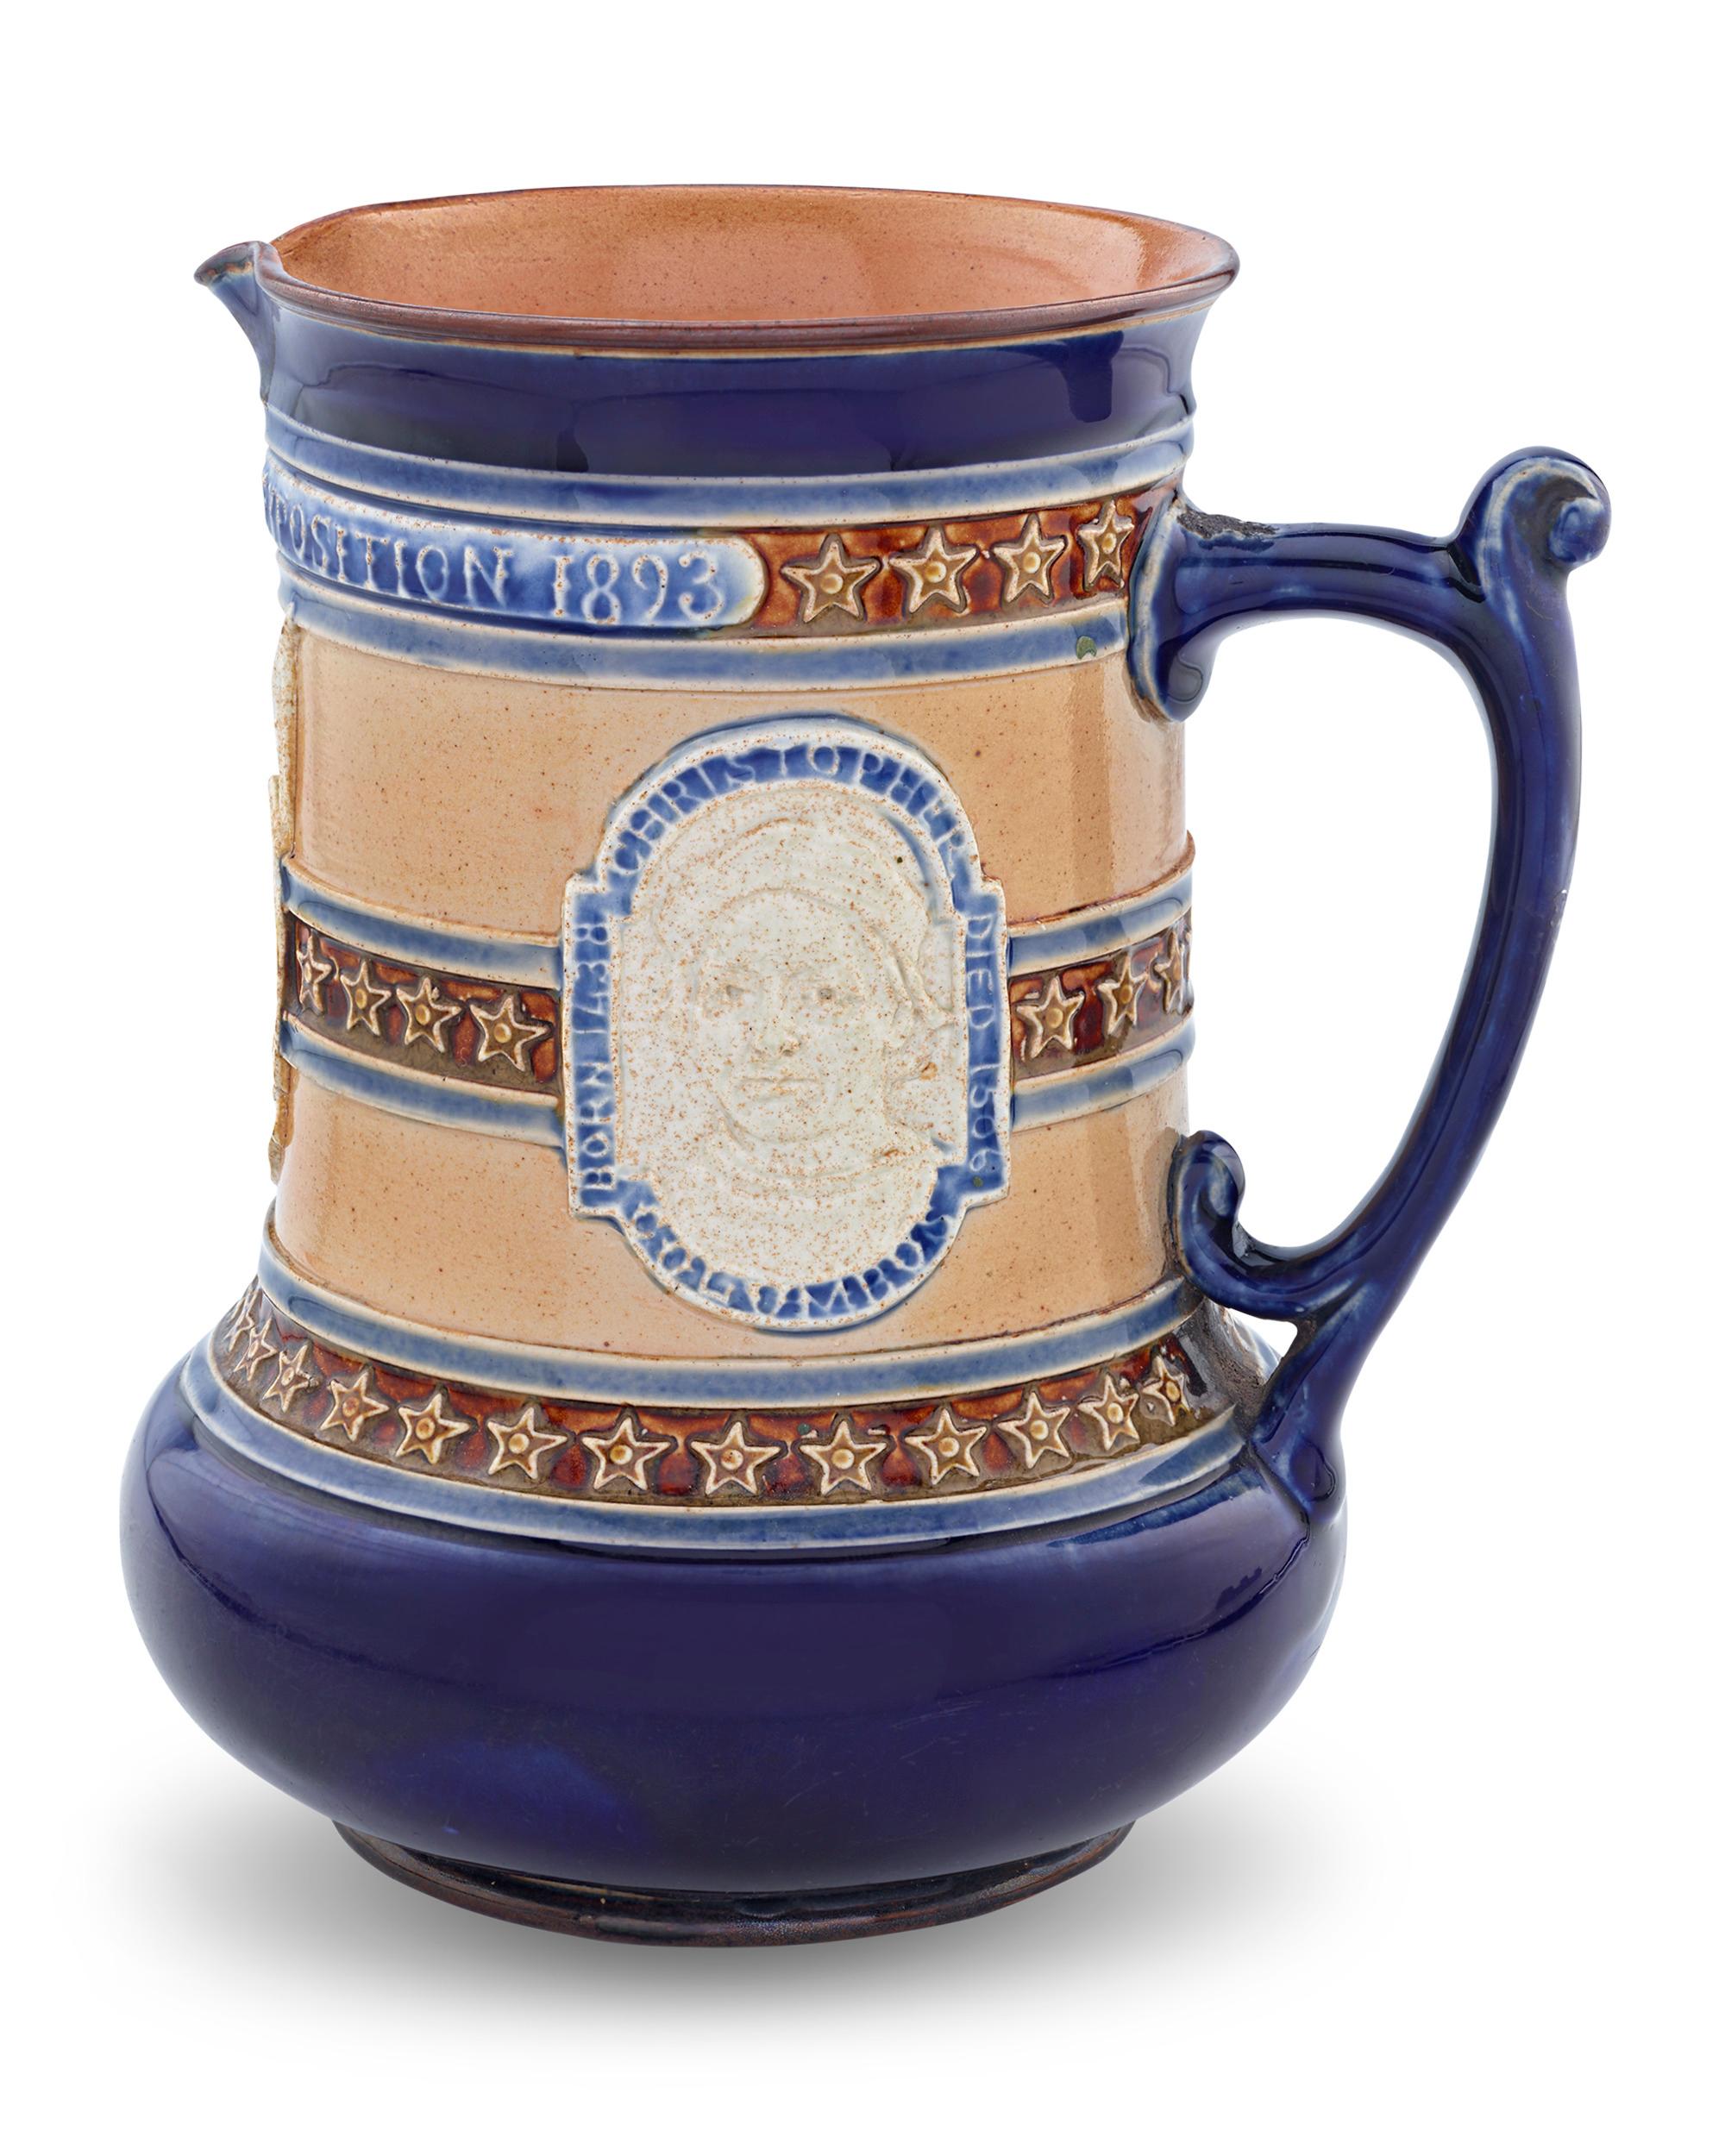 This stoneware jug by Royal Doulton's Lambeth Studio was crafted to commemorate the World’s Columbian Exposition of 1893. Designed by John Broad, it not only features busts of George Washington and Christopher Columbus, but also an American eagle